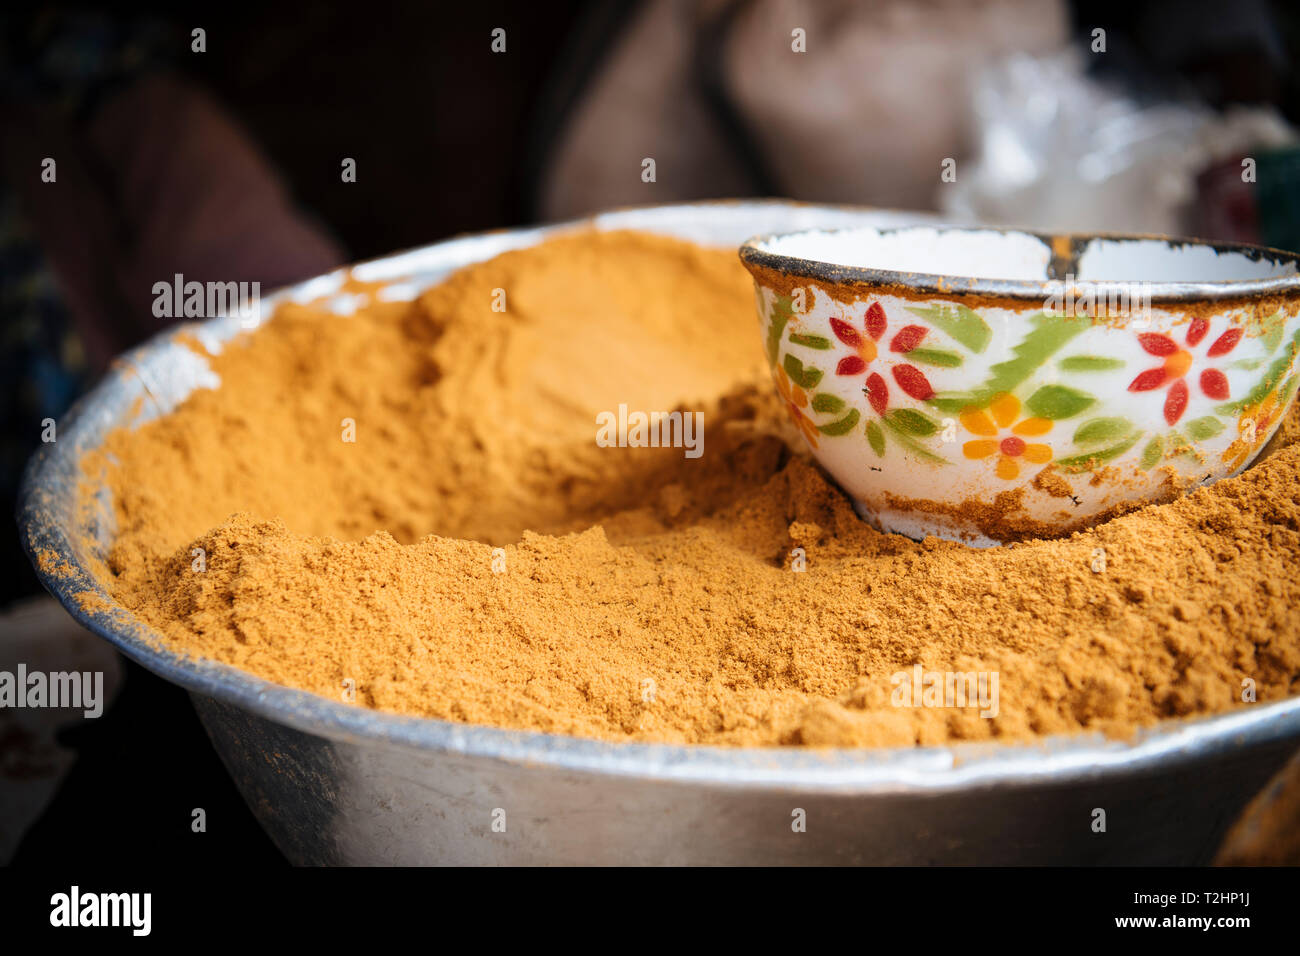 Spices on display in local market, Accra, Ghana, Africa Stock Photo